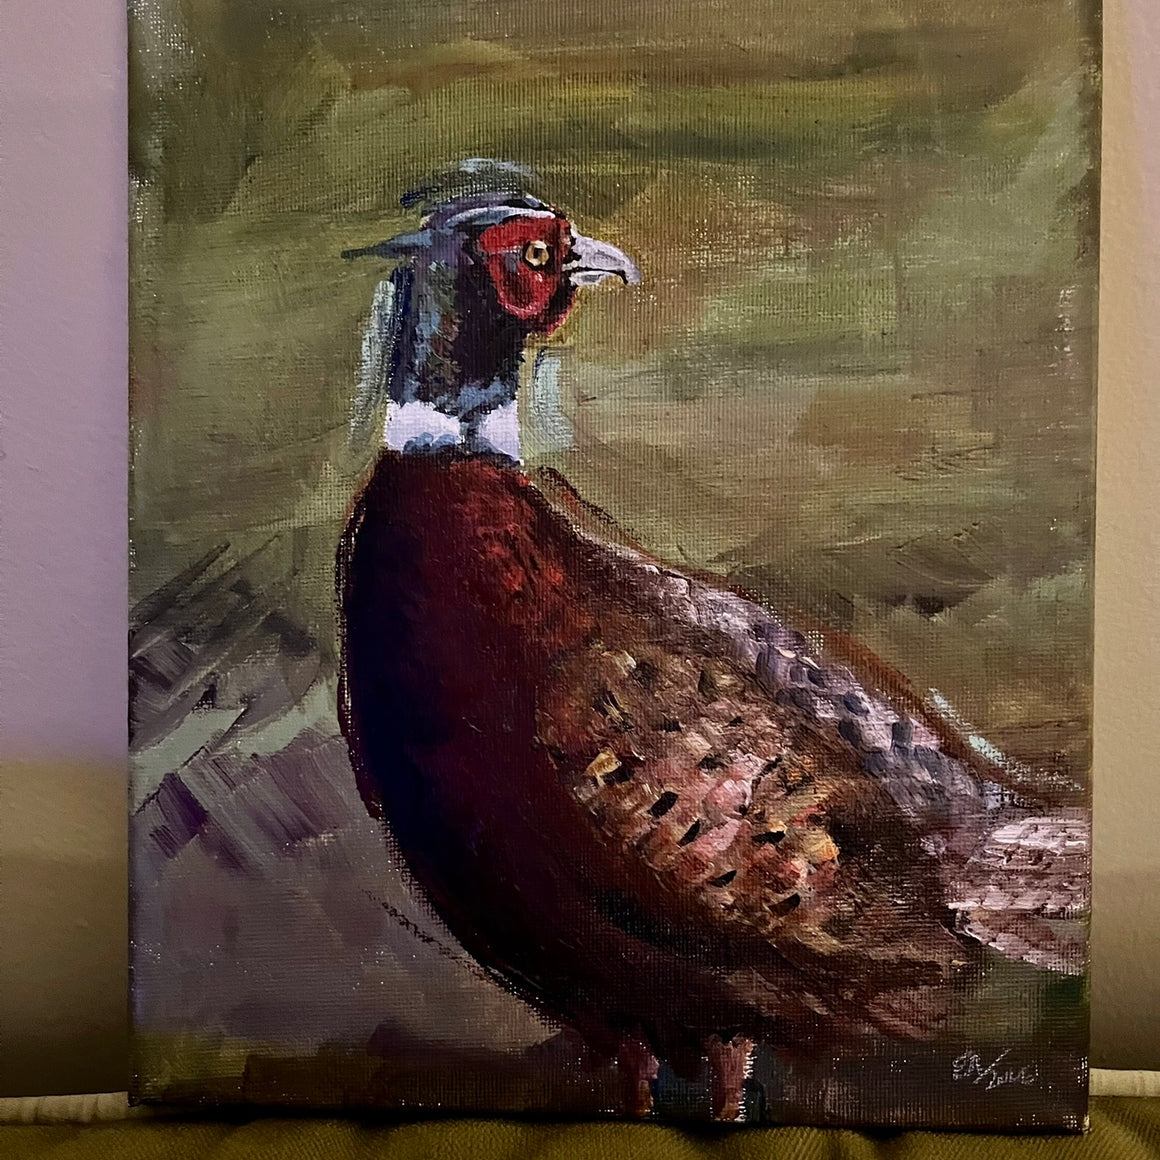 PHEASANT “ON THE LOOK OUT” PICTURE